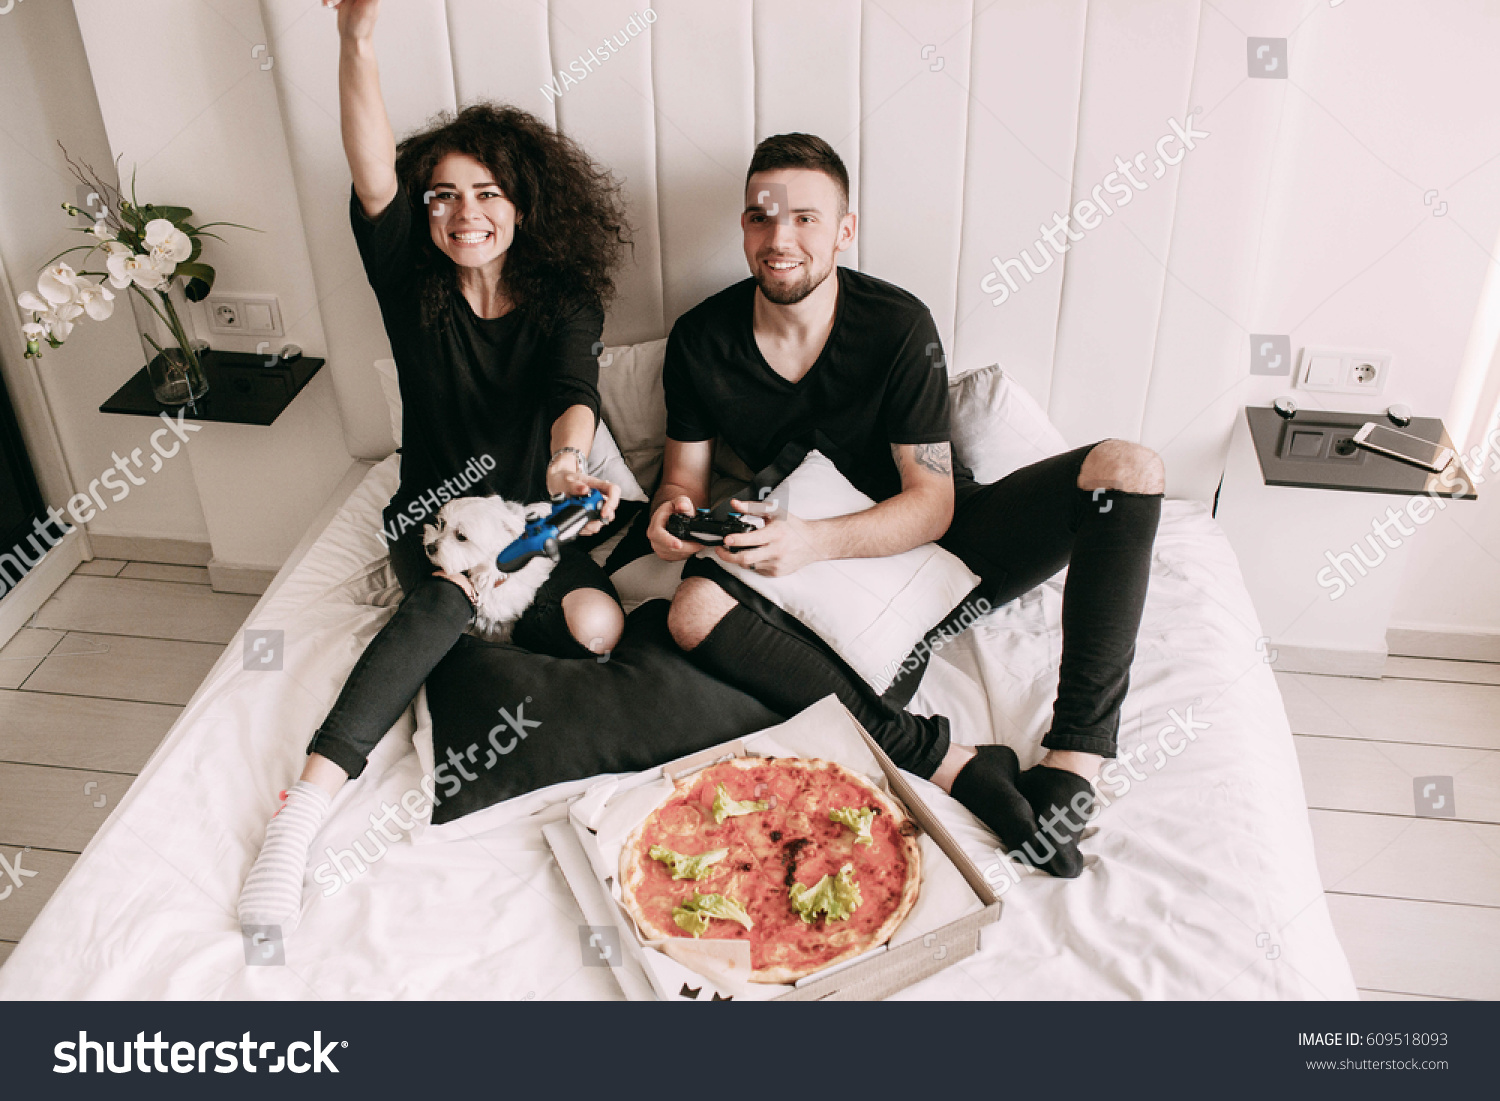 Girl wins playing with man on PS on bed #609518093